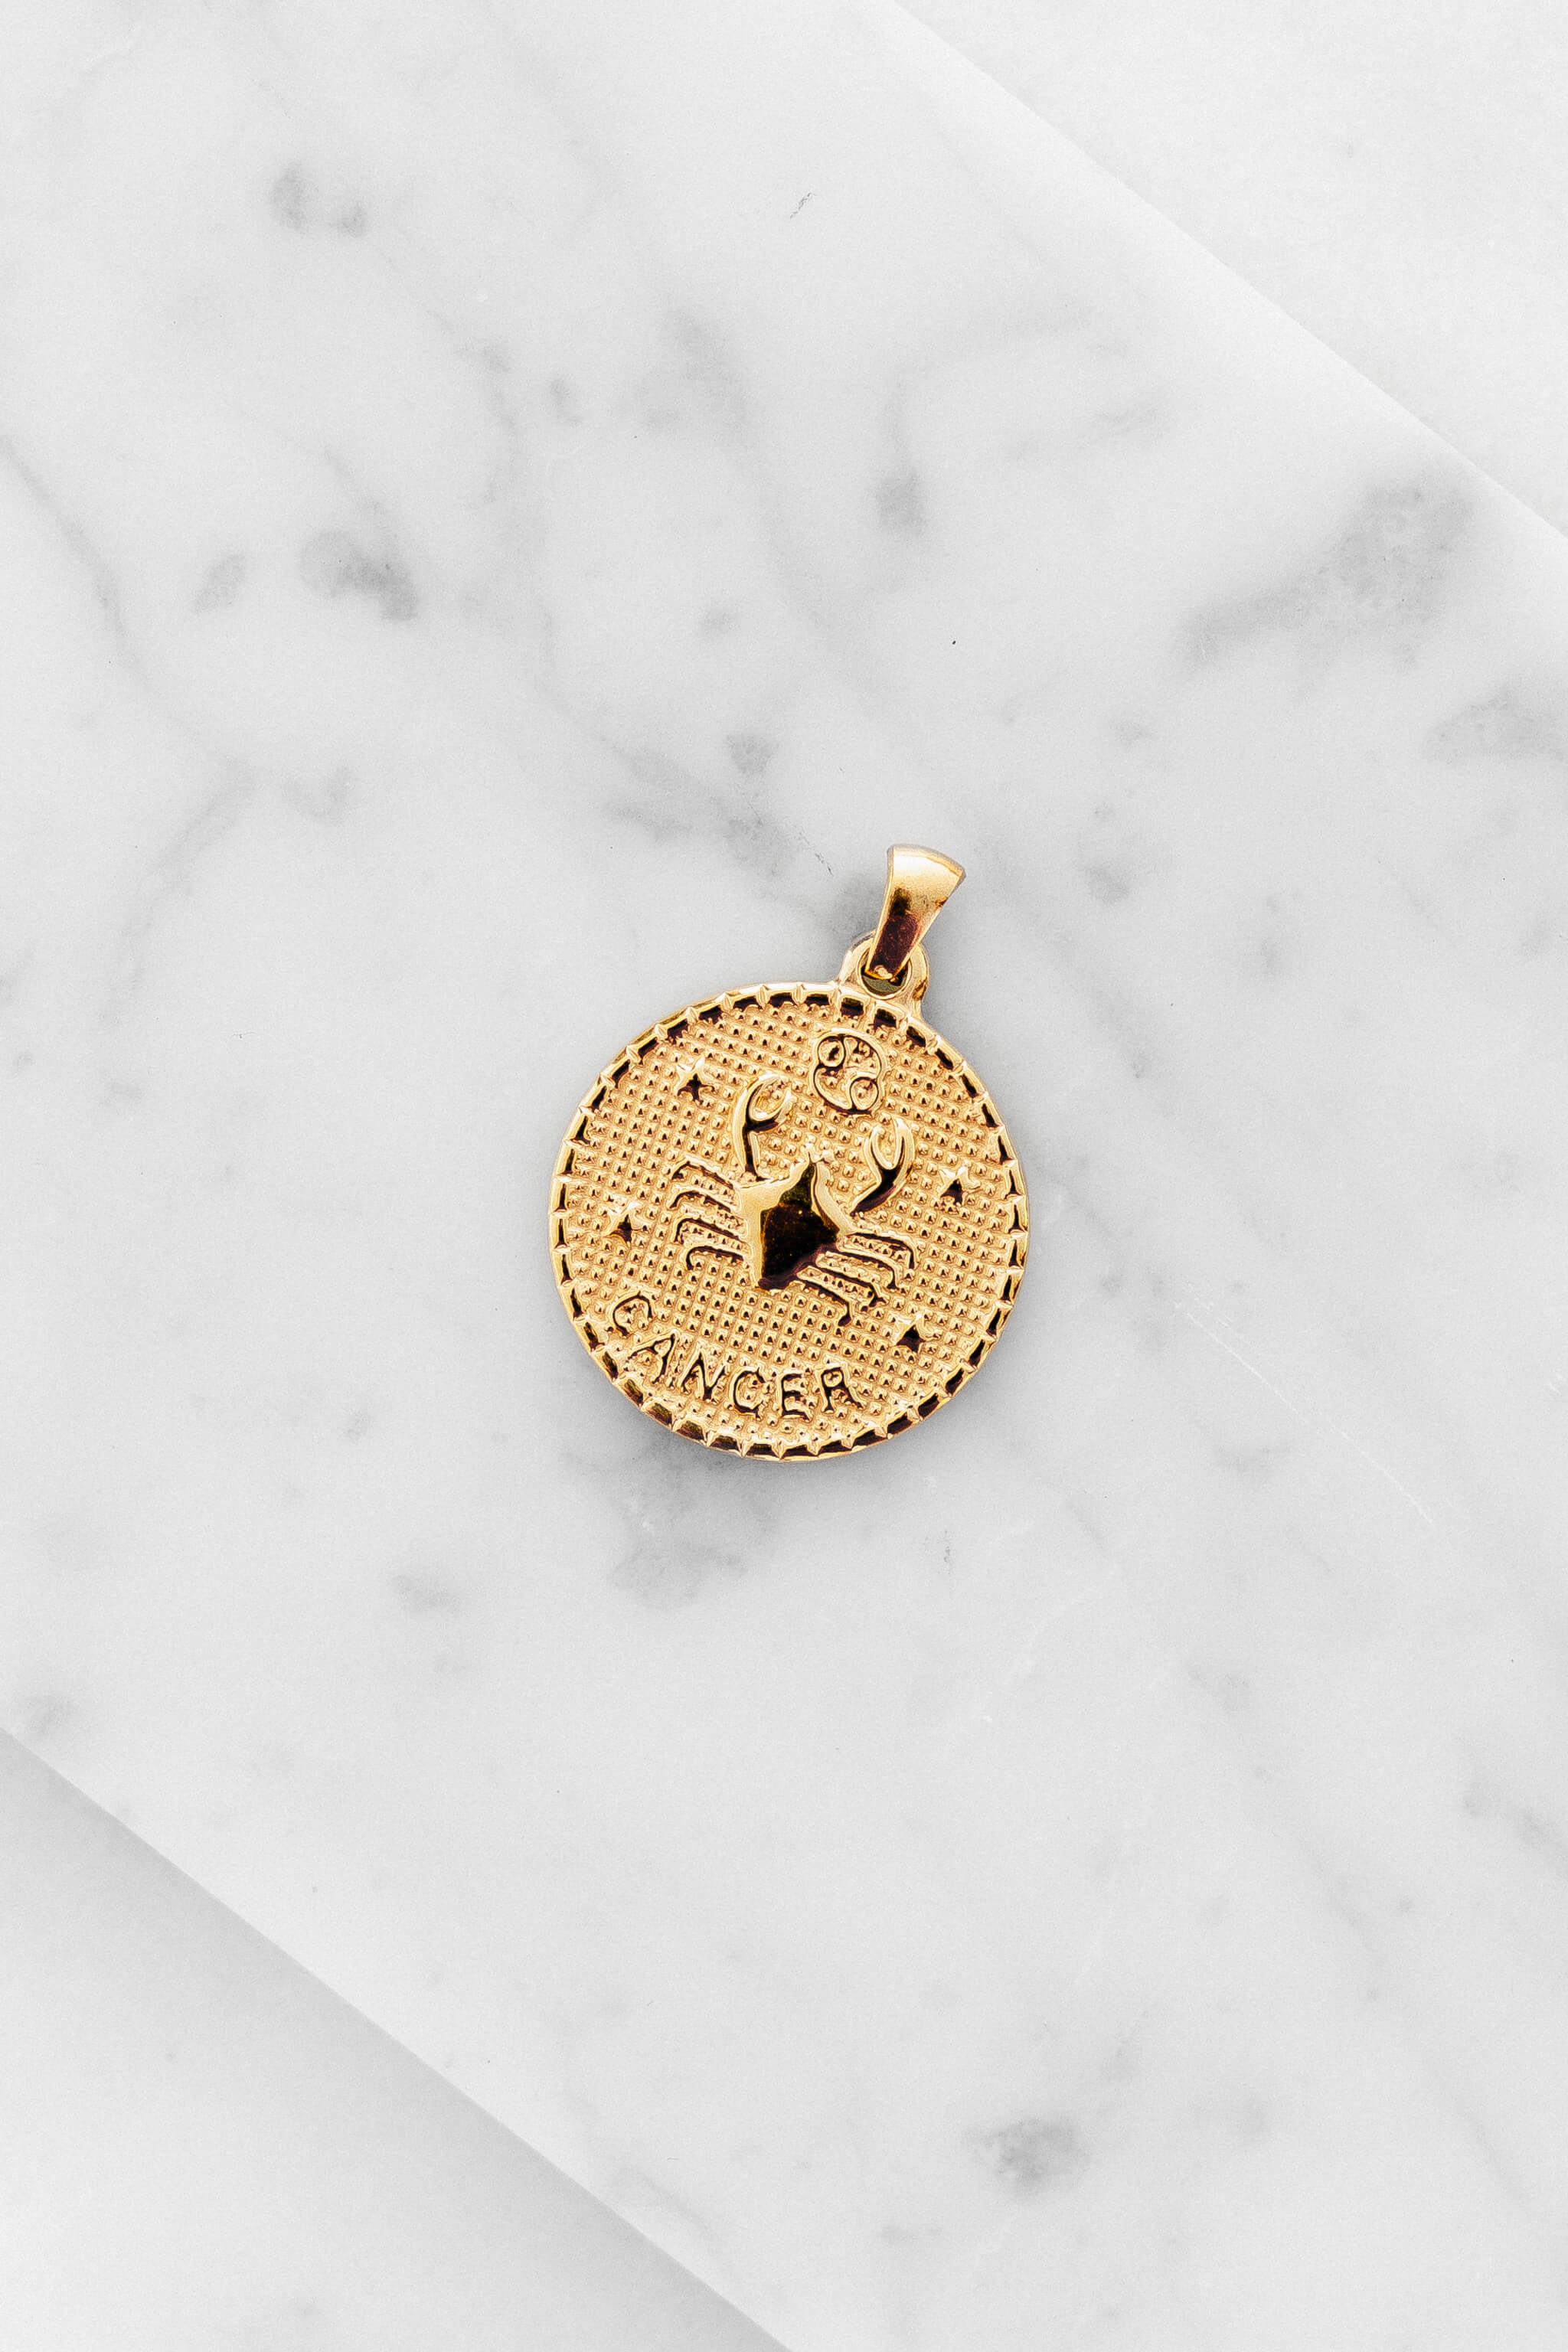 Cancer zodiac sign gold coin charm laying on a white marble